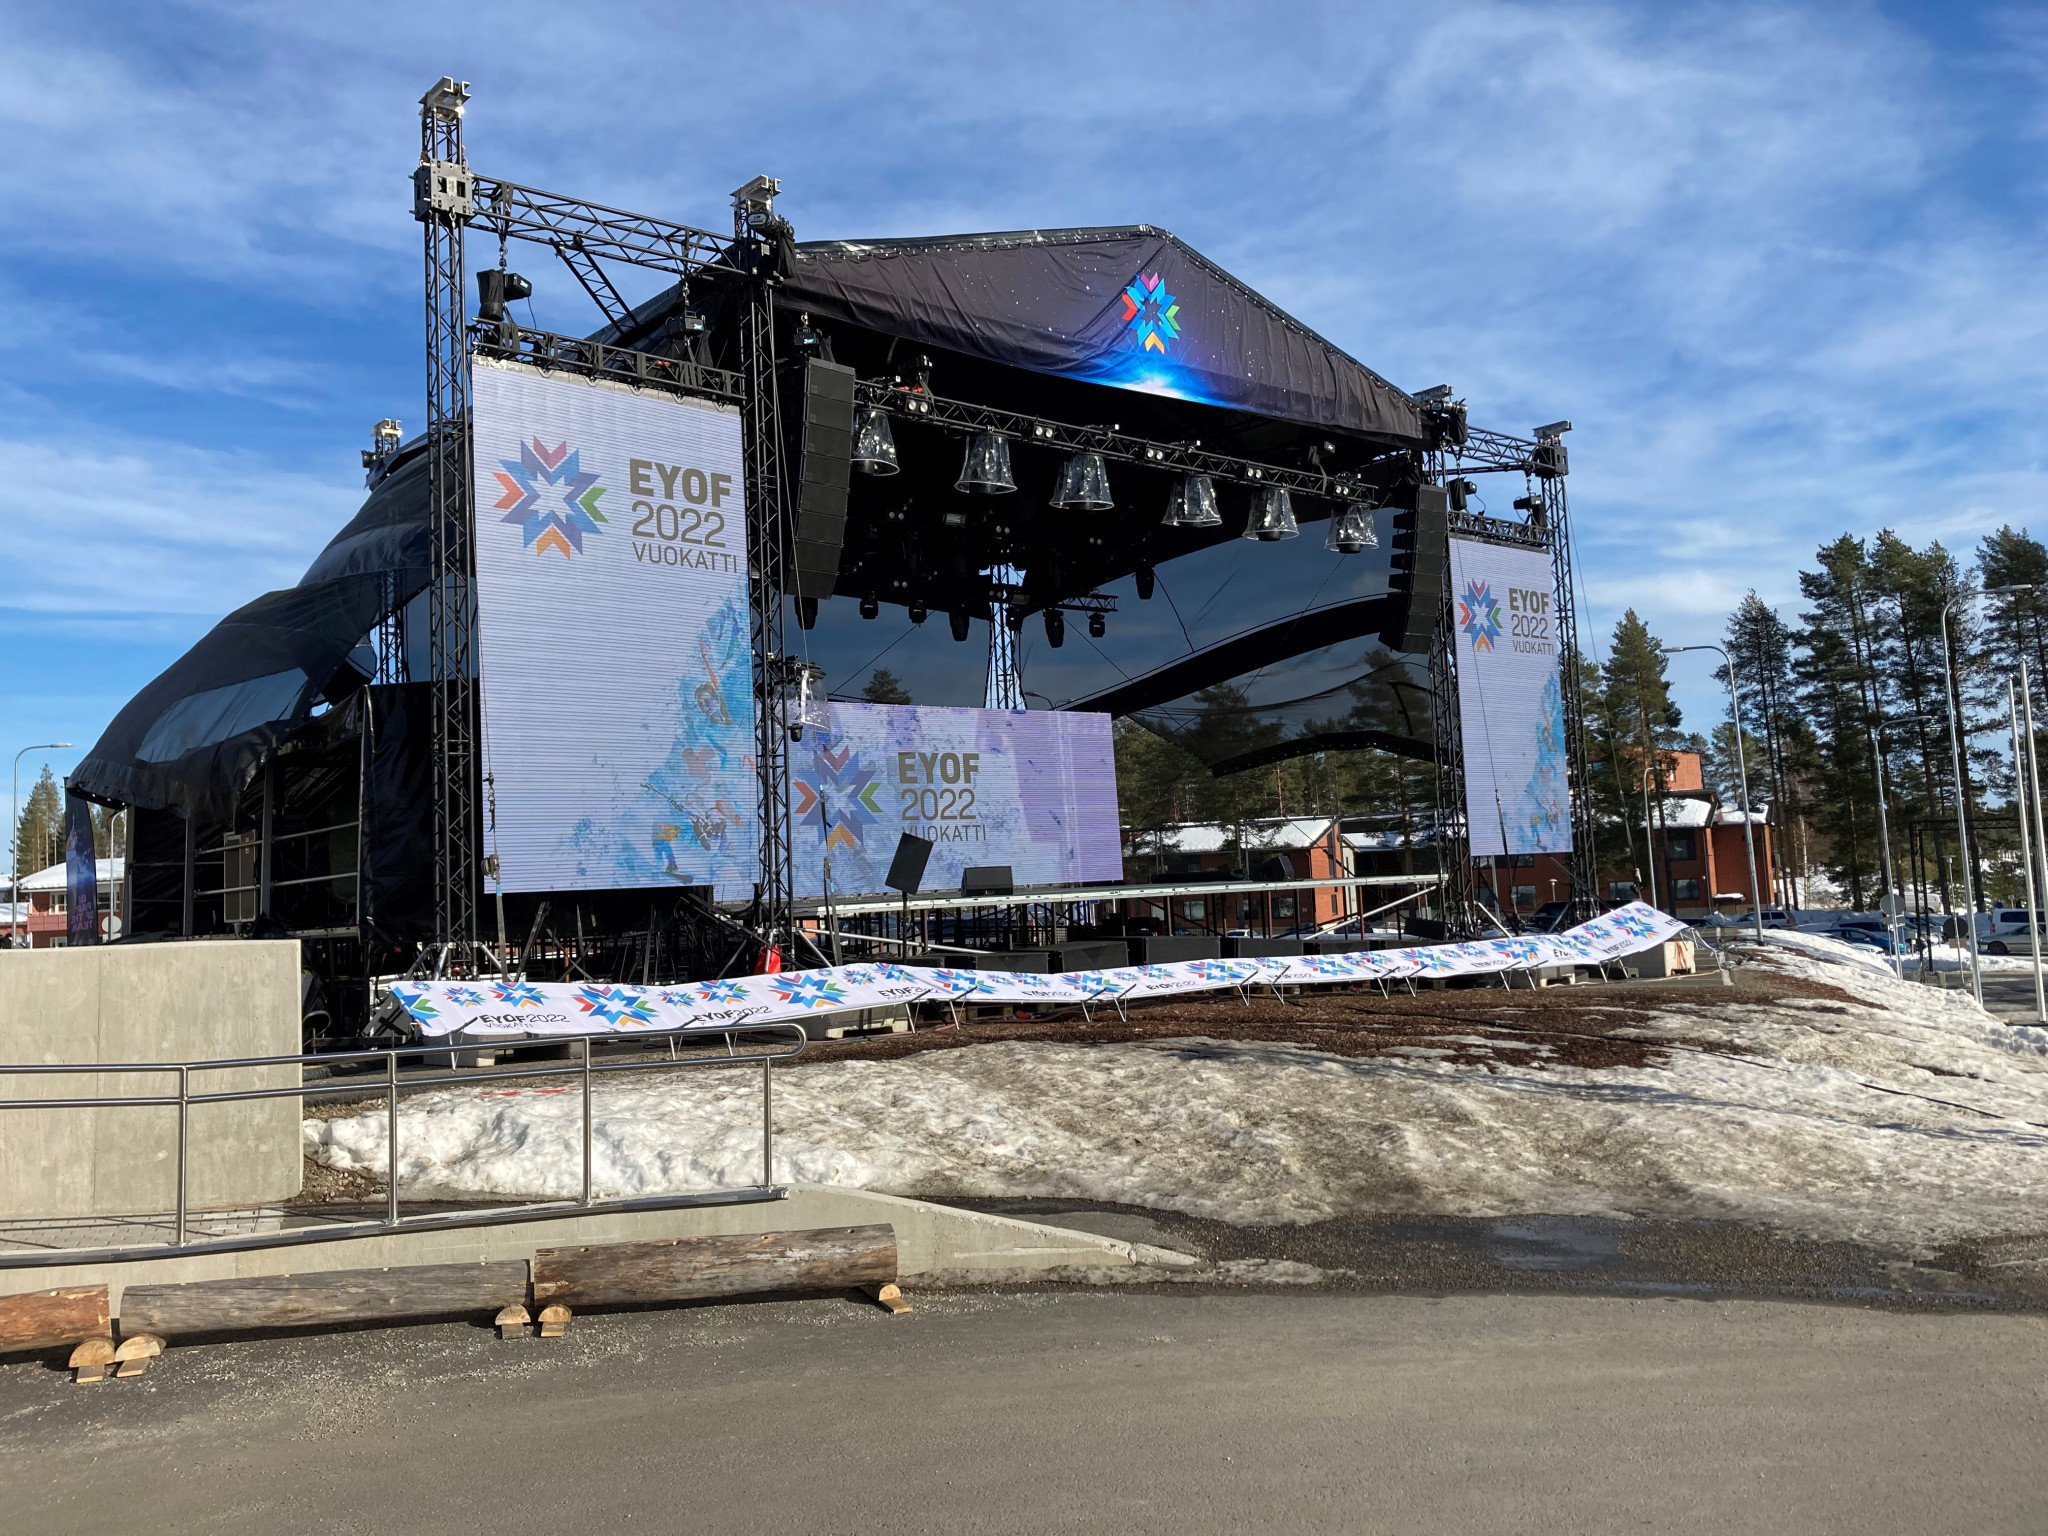 Tomorrow's Winter European Youth Olympic Festival Opening Ceremony is set to be held outside the Vuokatti Arena ©ITG